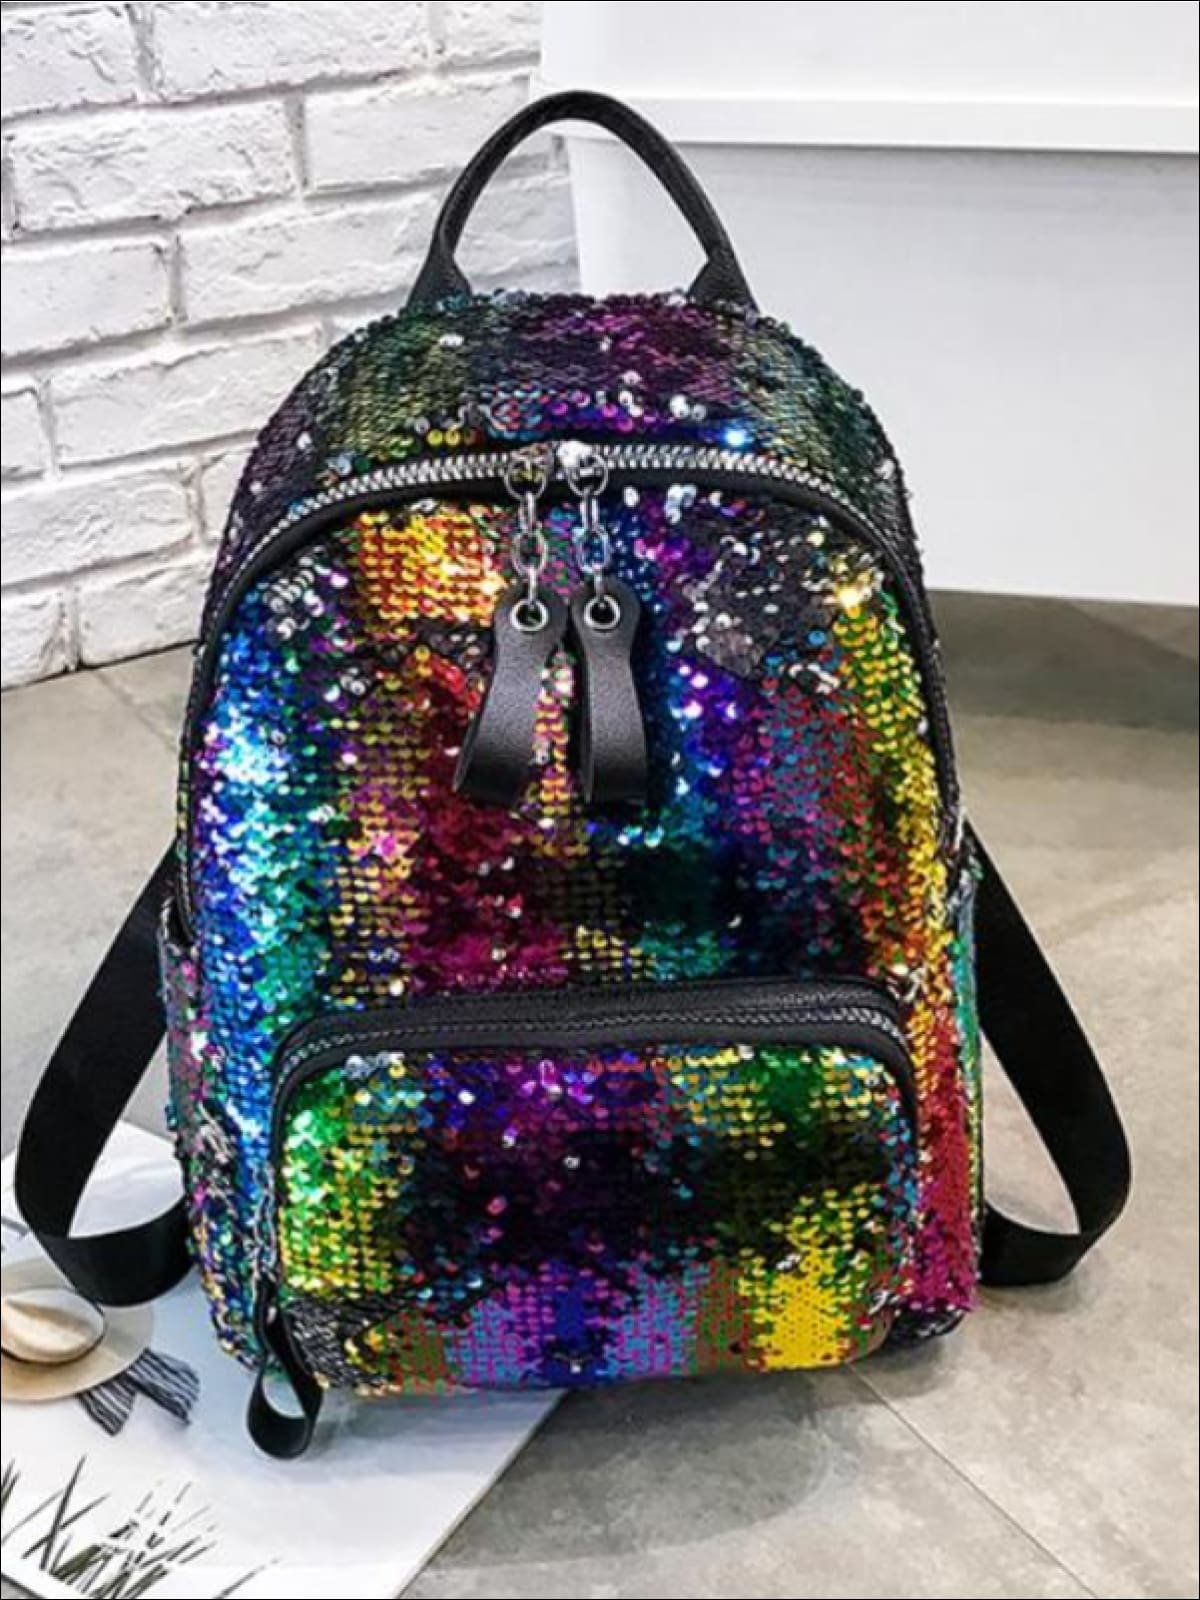 Buy Colour Changing Bags Sequins Bags for Girls Backpack Shoulder